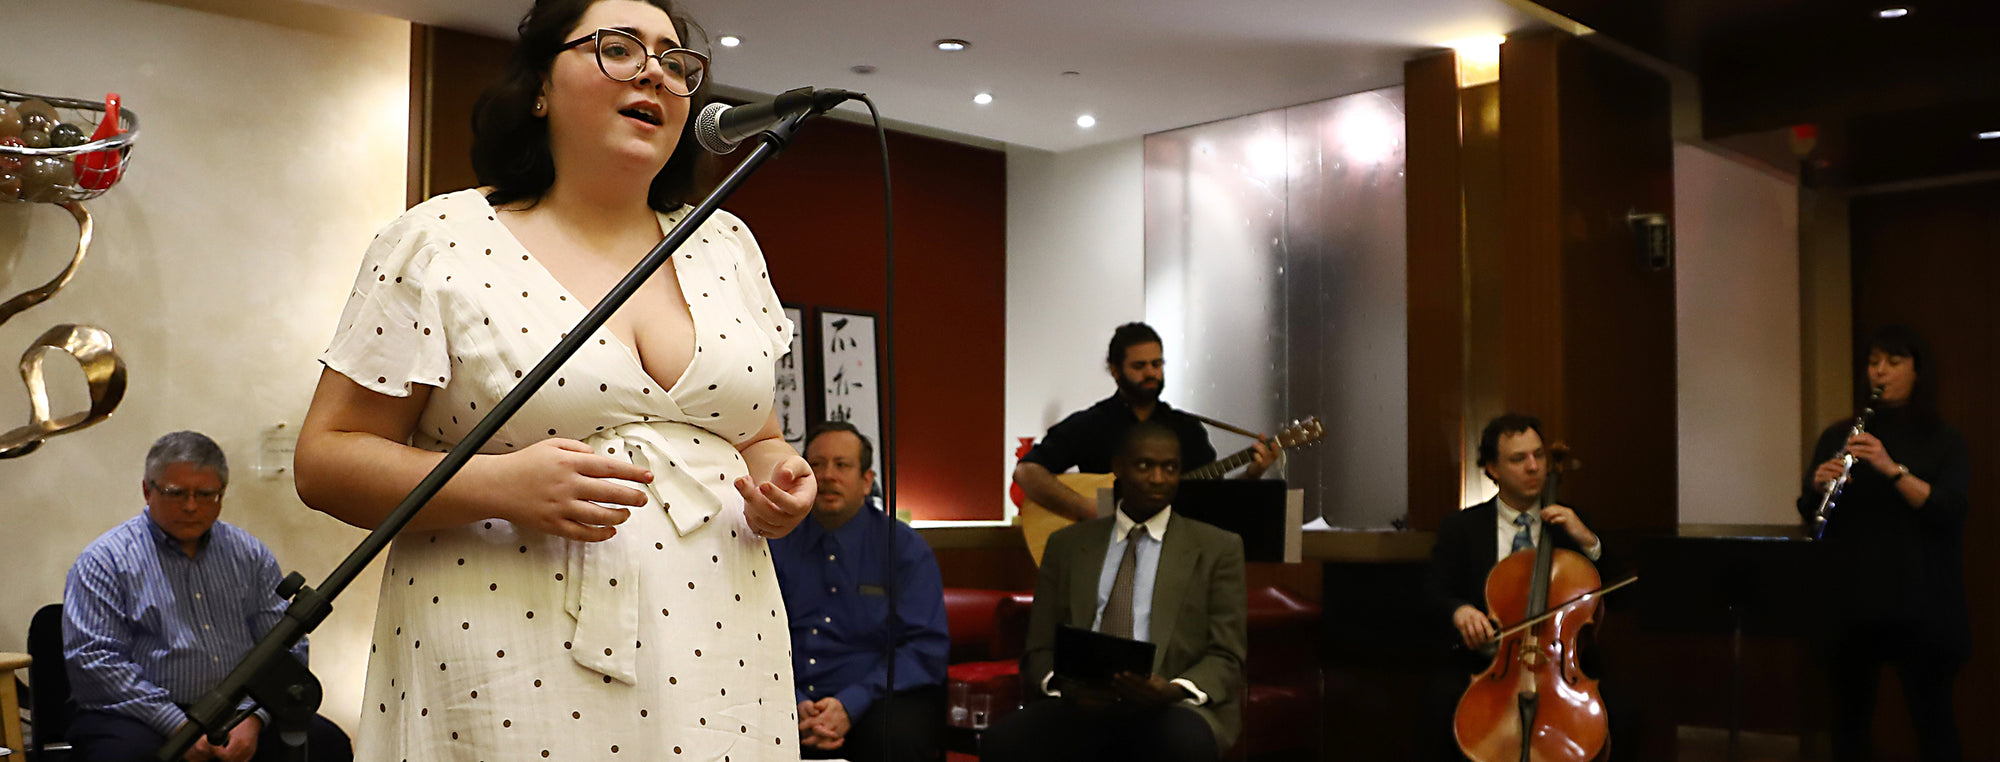 Detroit Opera Provided Gesher Human Services Singer with Vocal Lessons In Preparation for Event